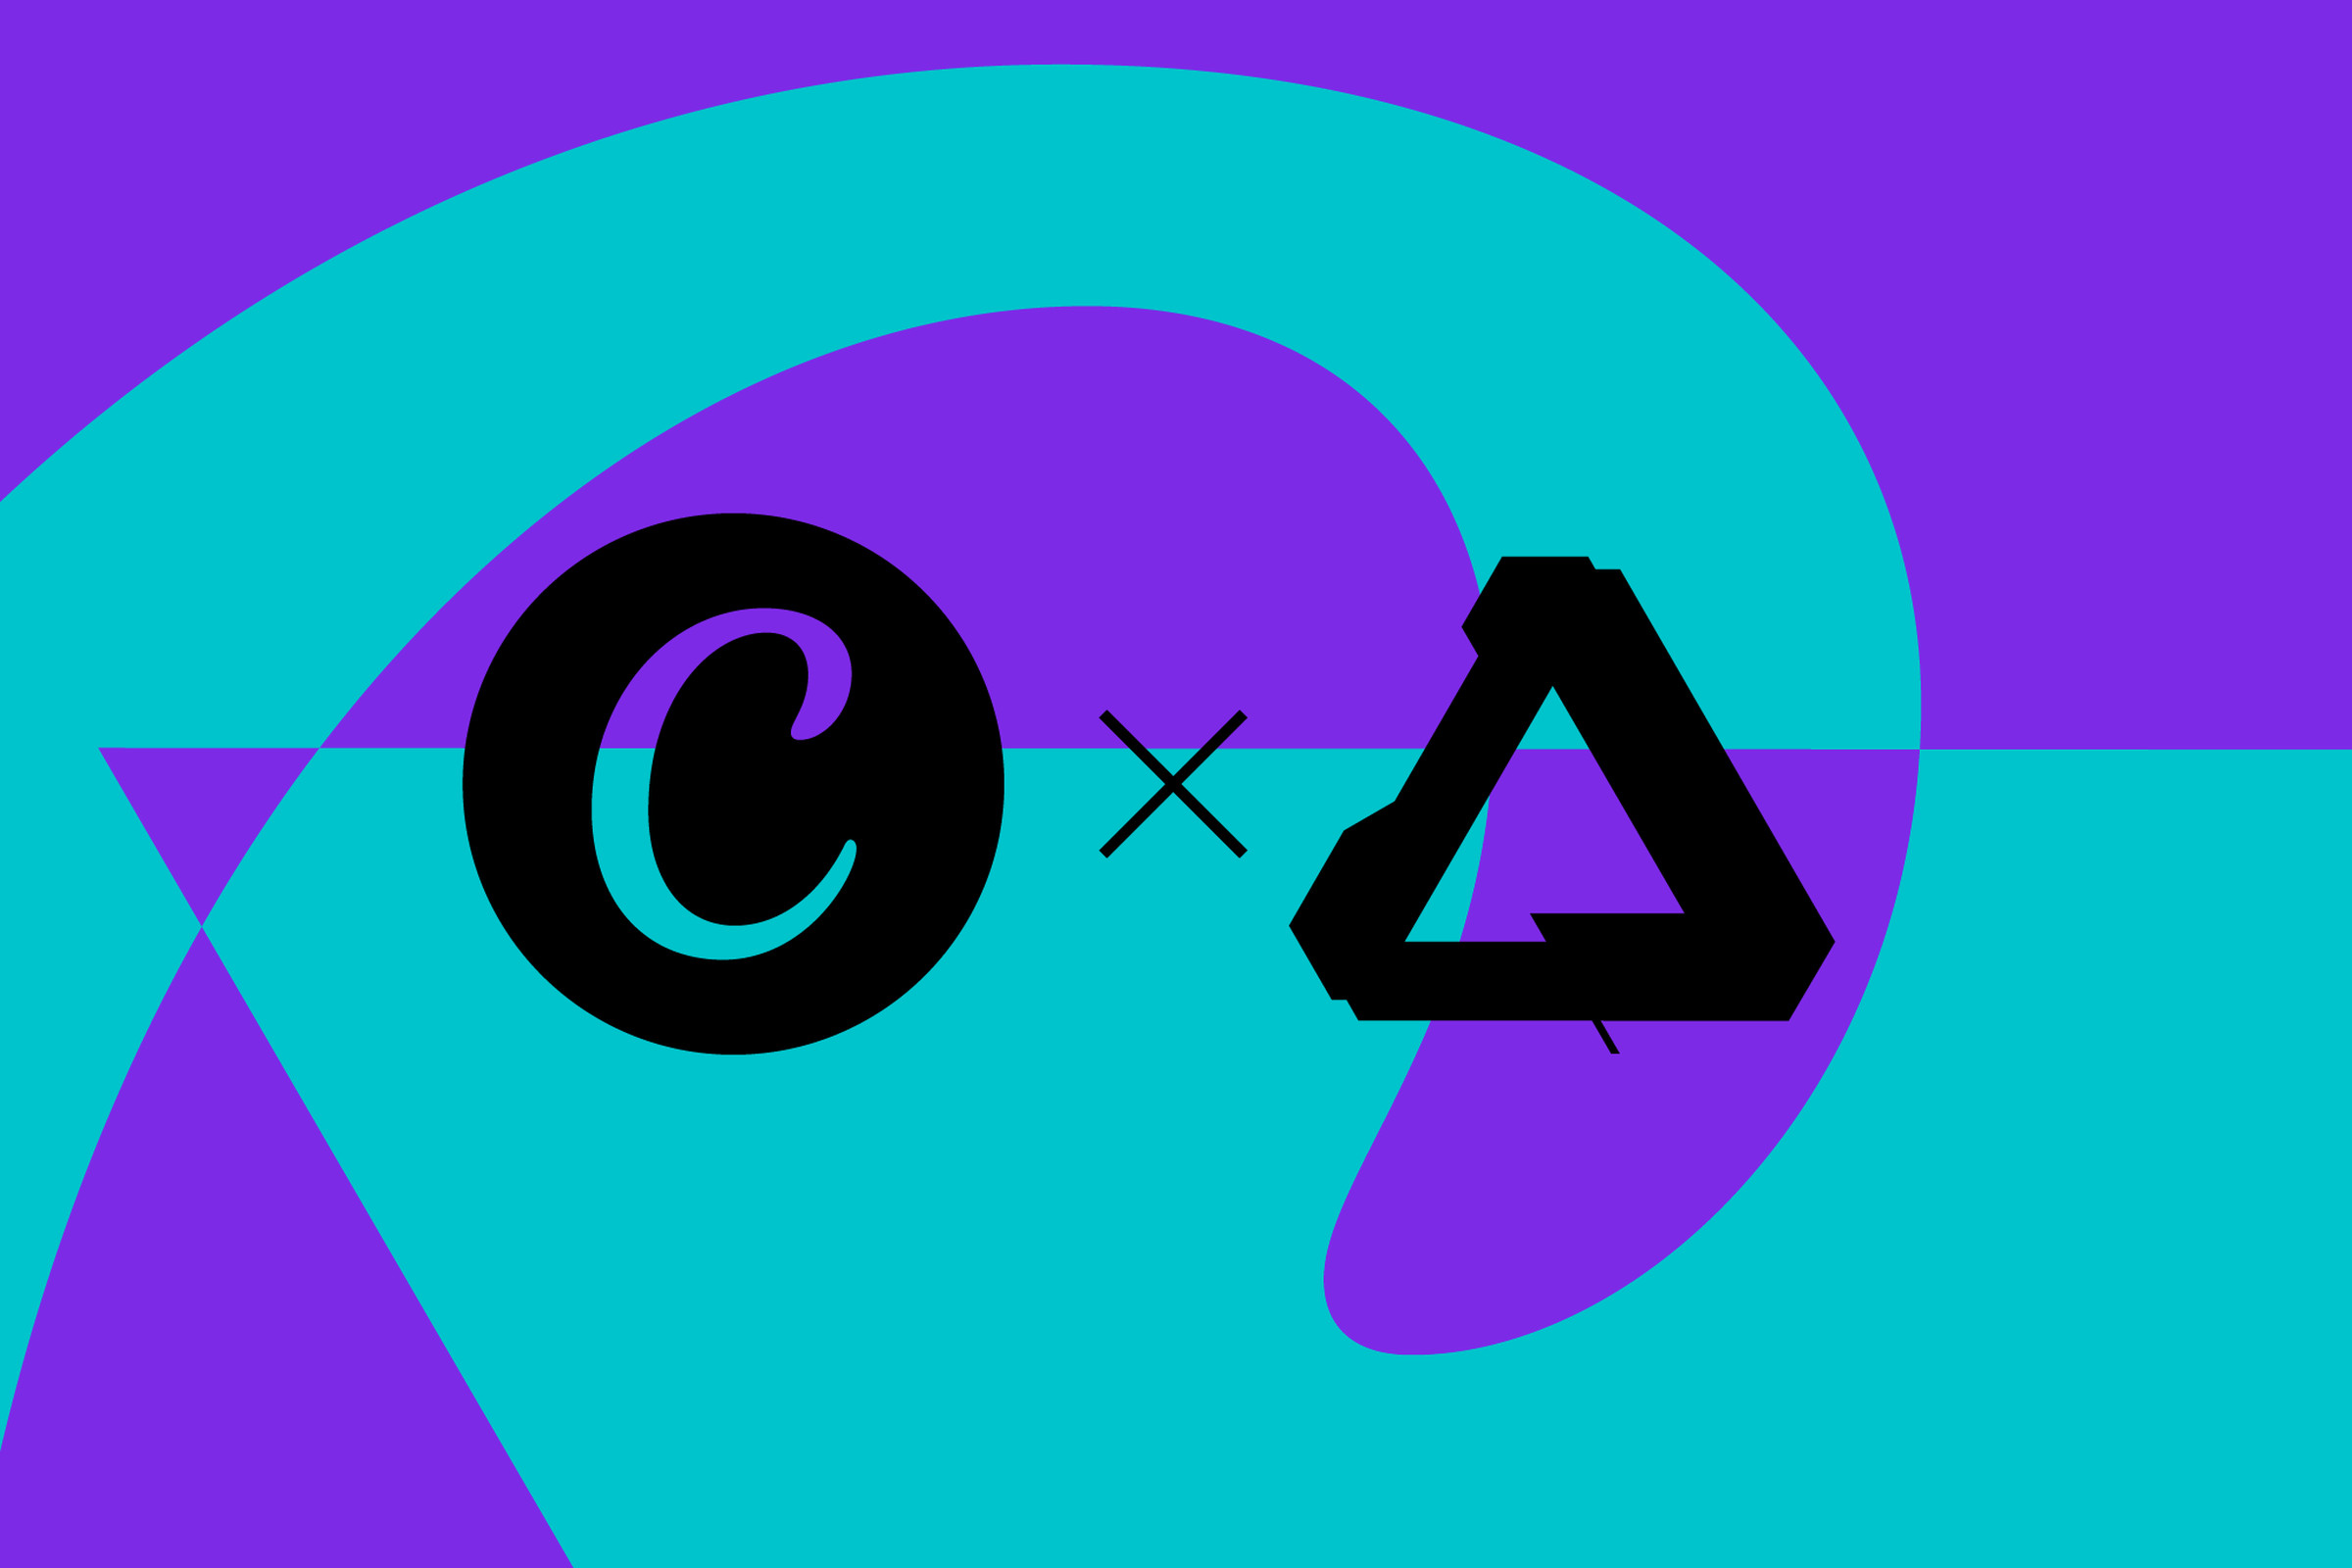 Illustration of the Canva and Affinity logos next to each other.